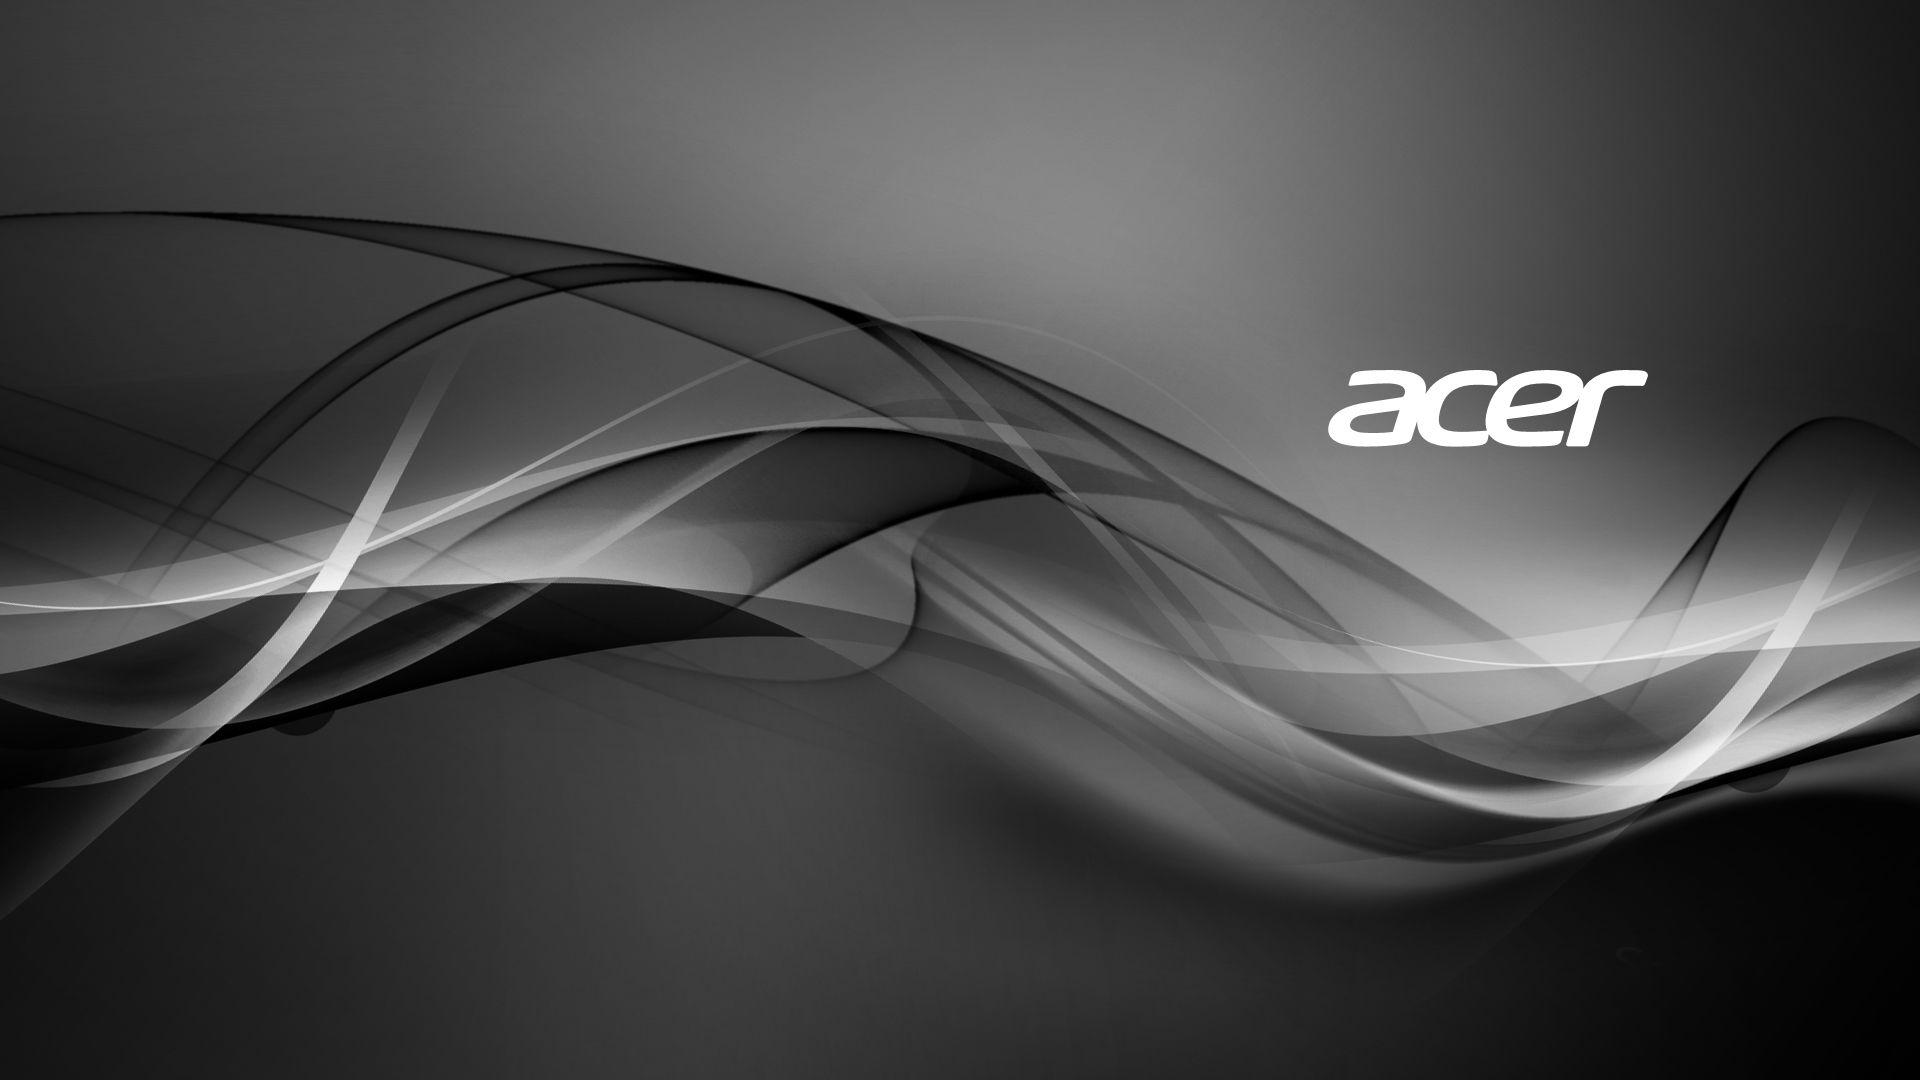 Acer Wallpaper. PC Doctor Ardee